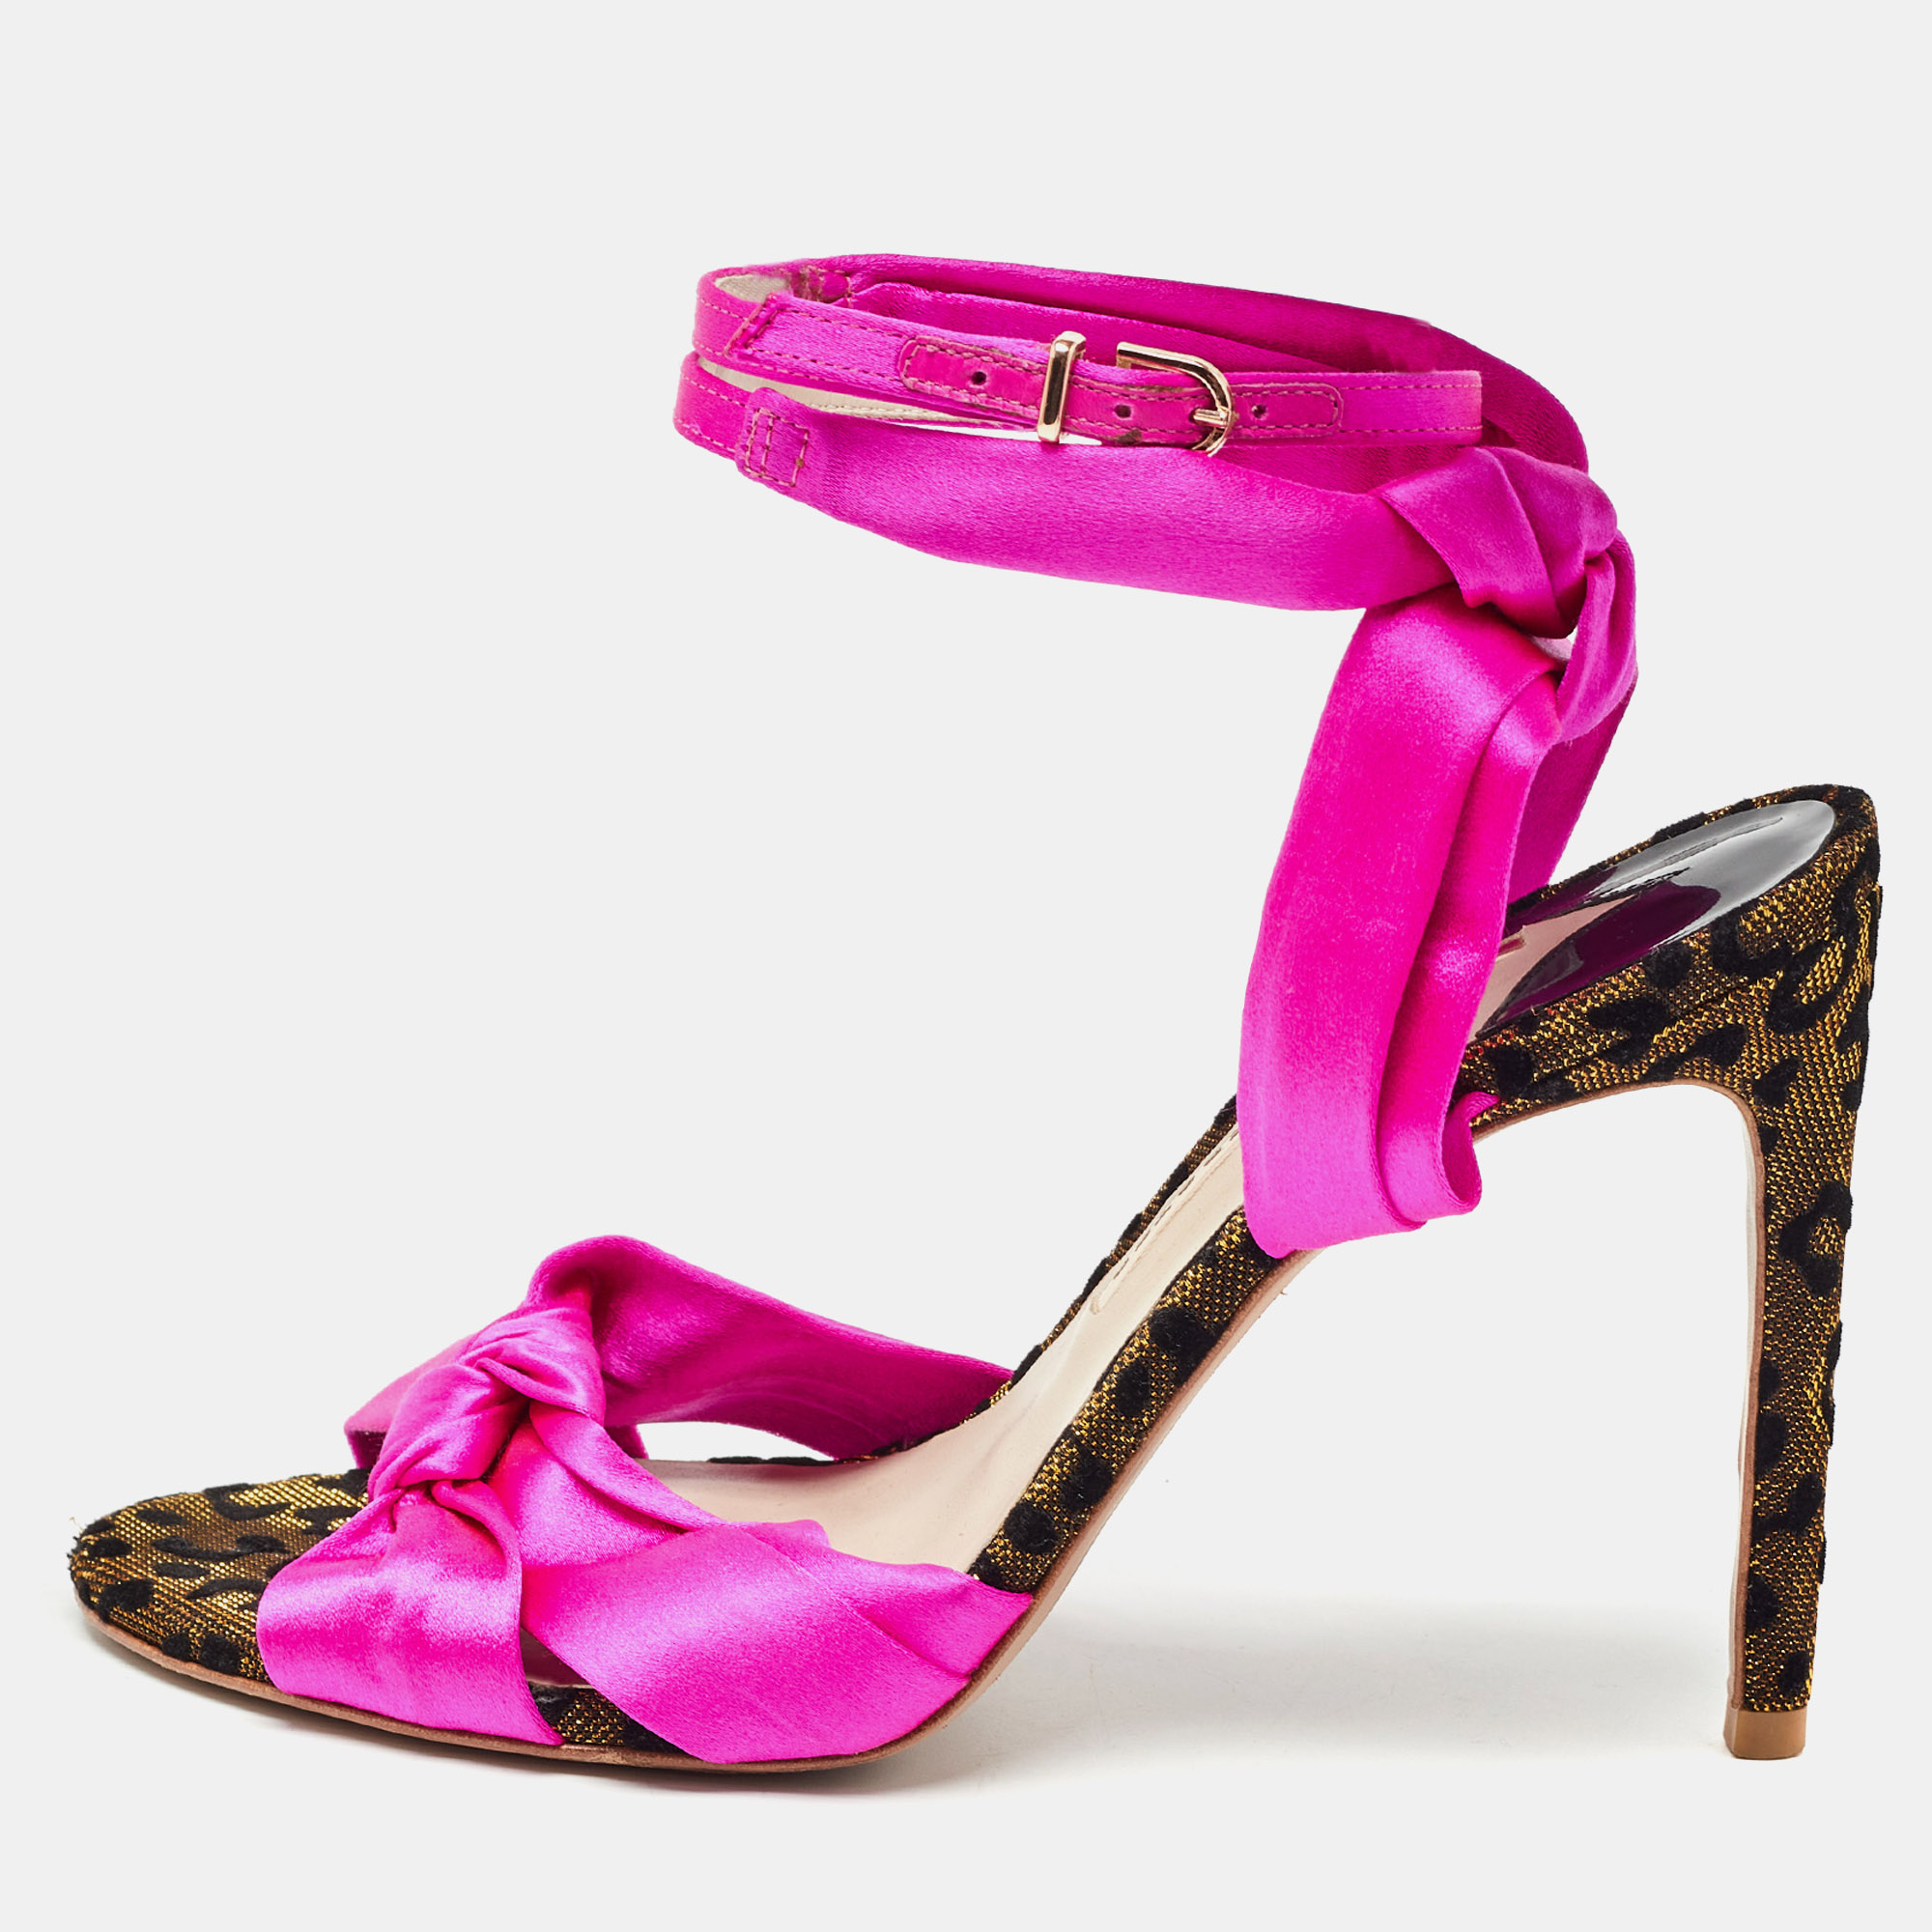 Sophia webster fuchsia knotted satin ankle strap sandals size 38.5